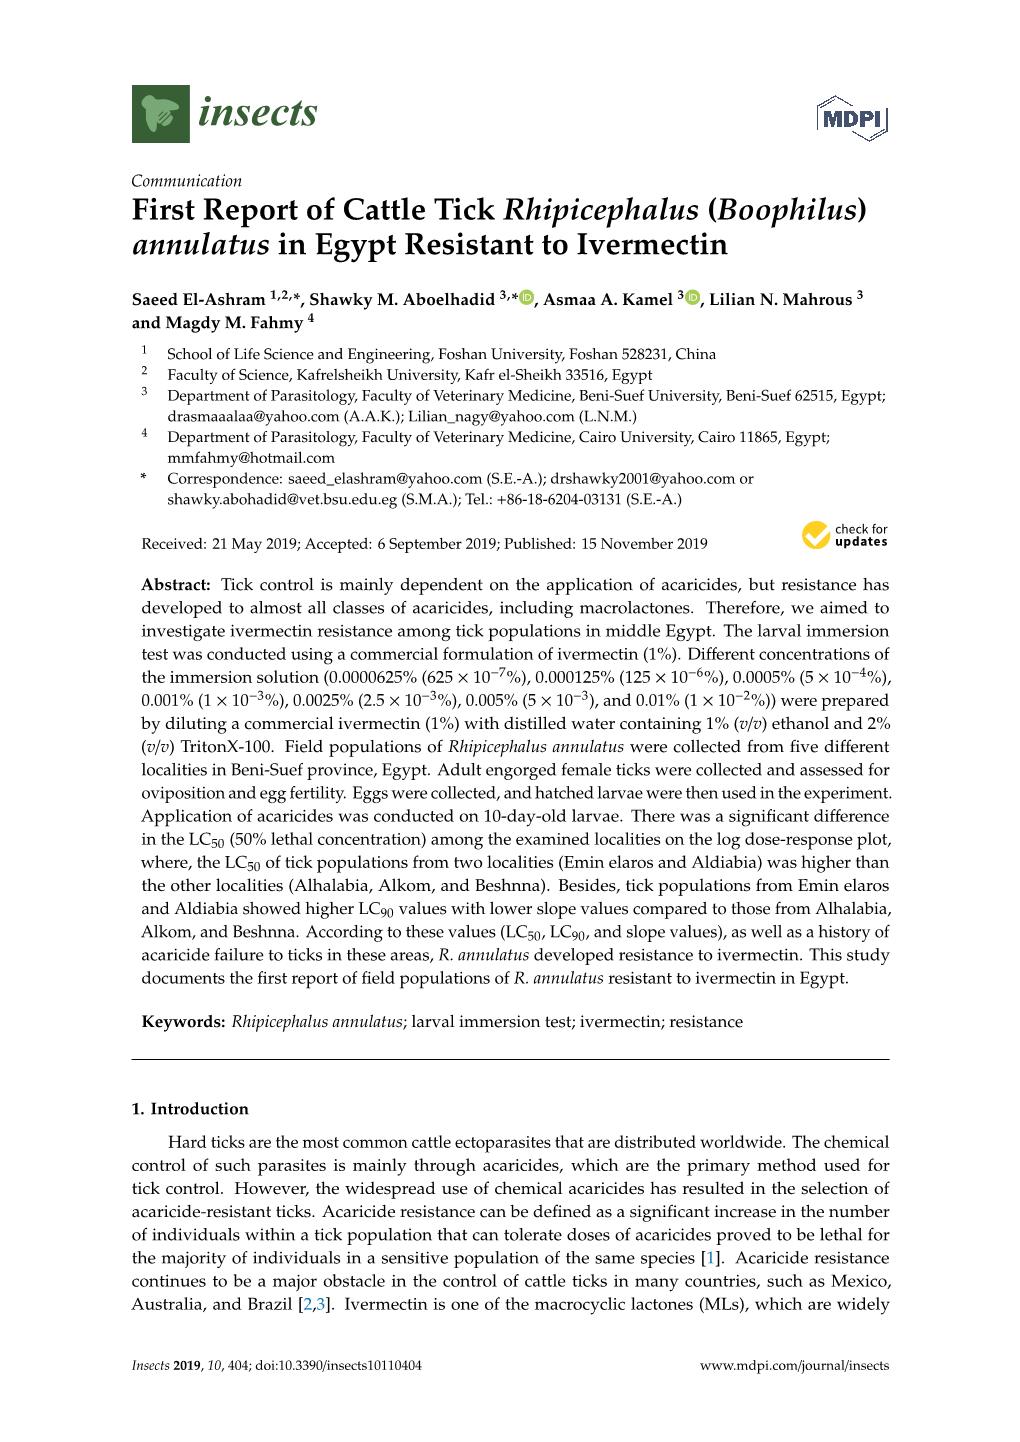 First Report of Cattle Tick Rhipicephalus (Boophilus) Annulatus in Egypt Resistant to Ivermectin